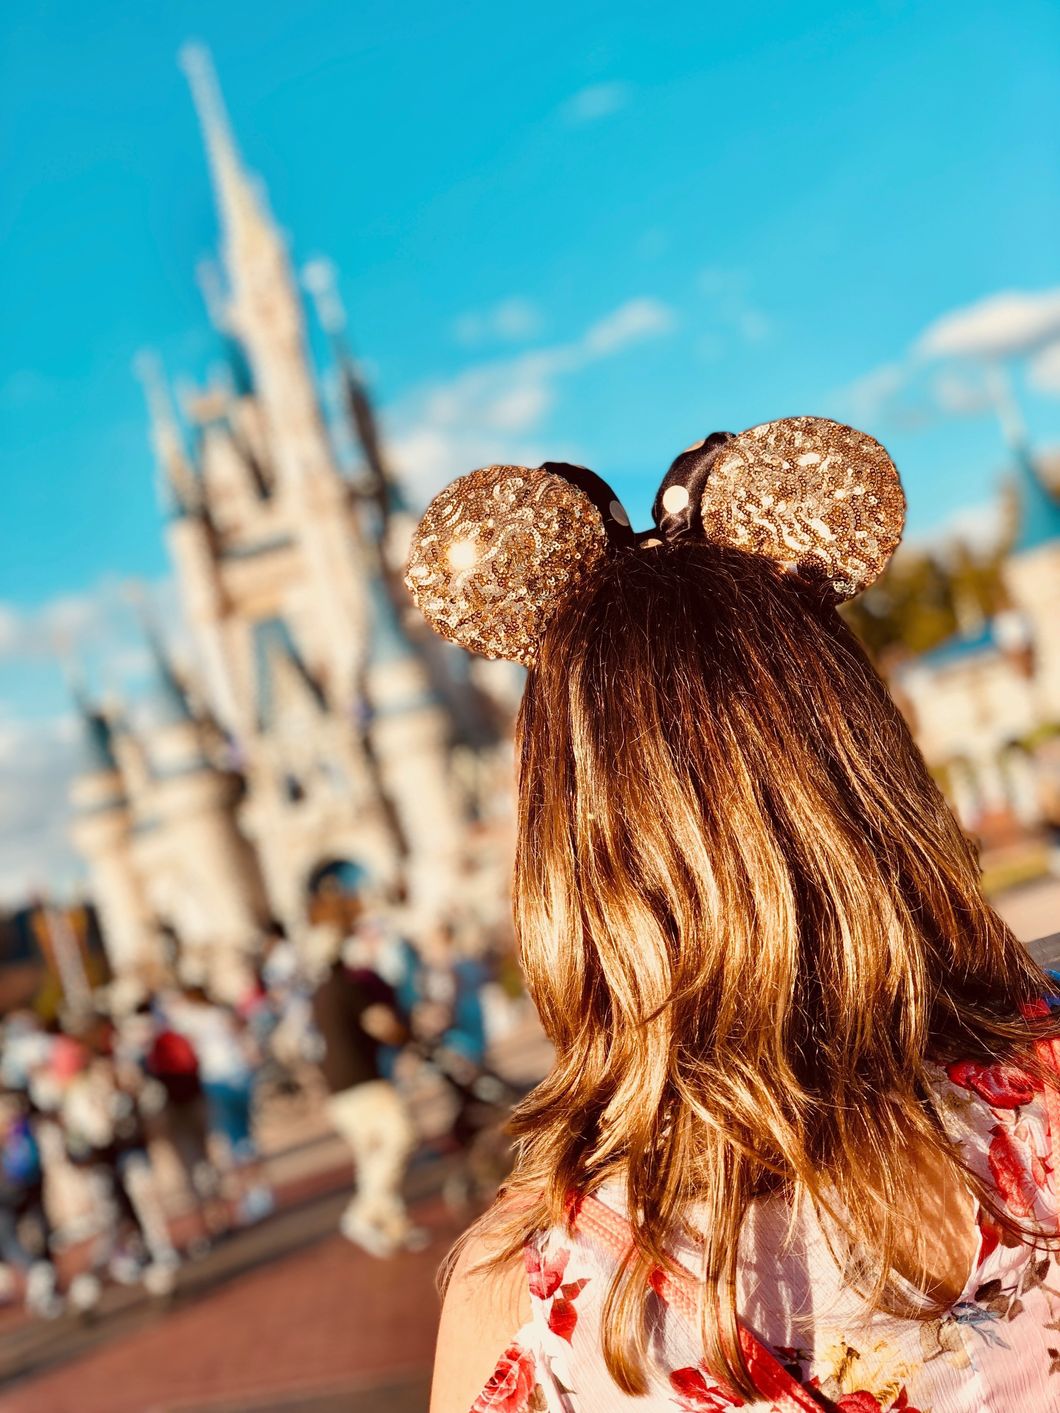 The 6 Grueling But Rewarding Stages Of Applying To The Disney College Program